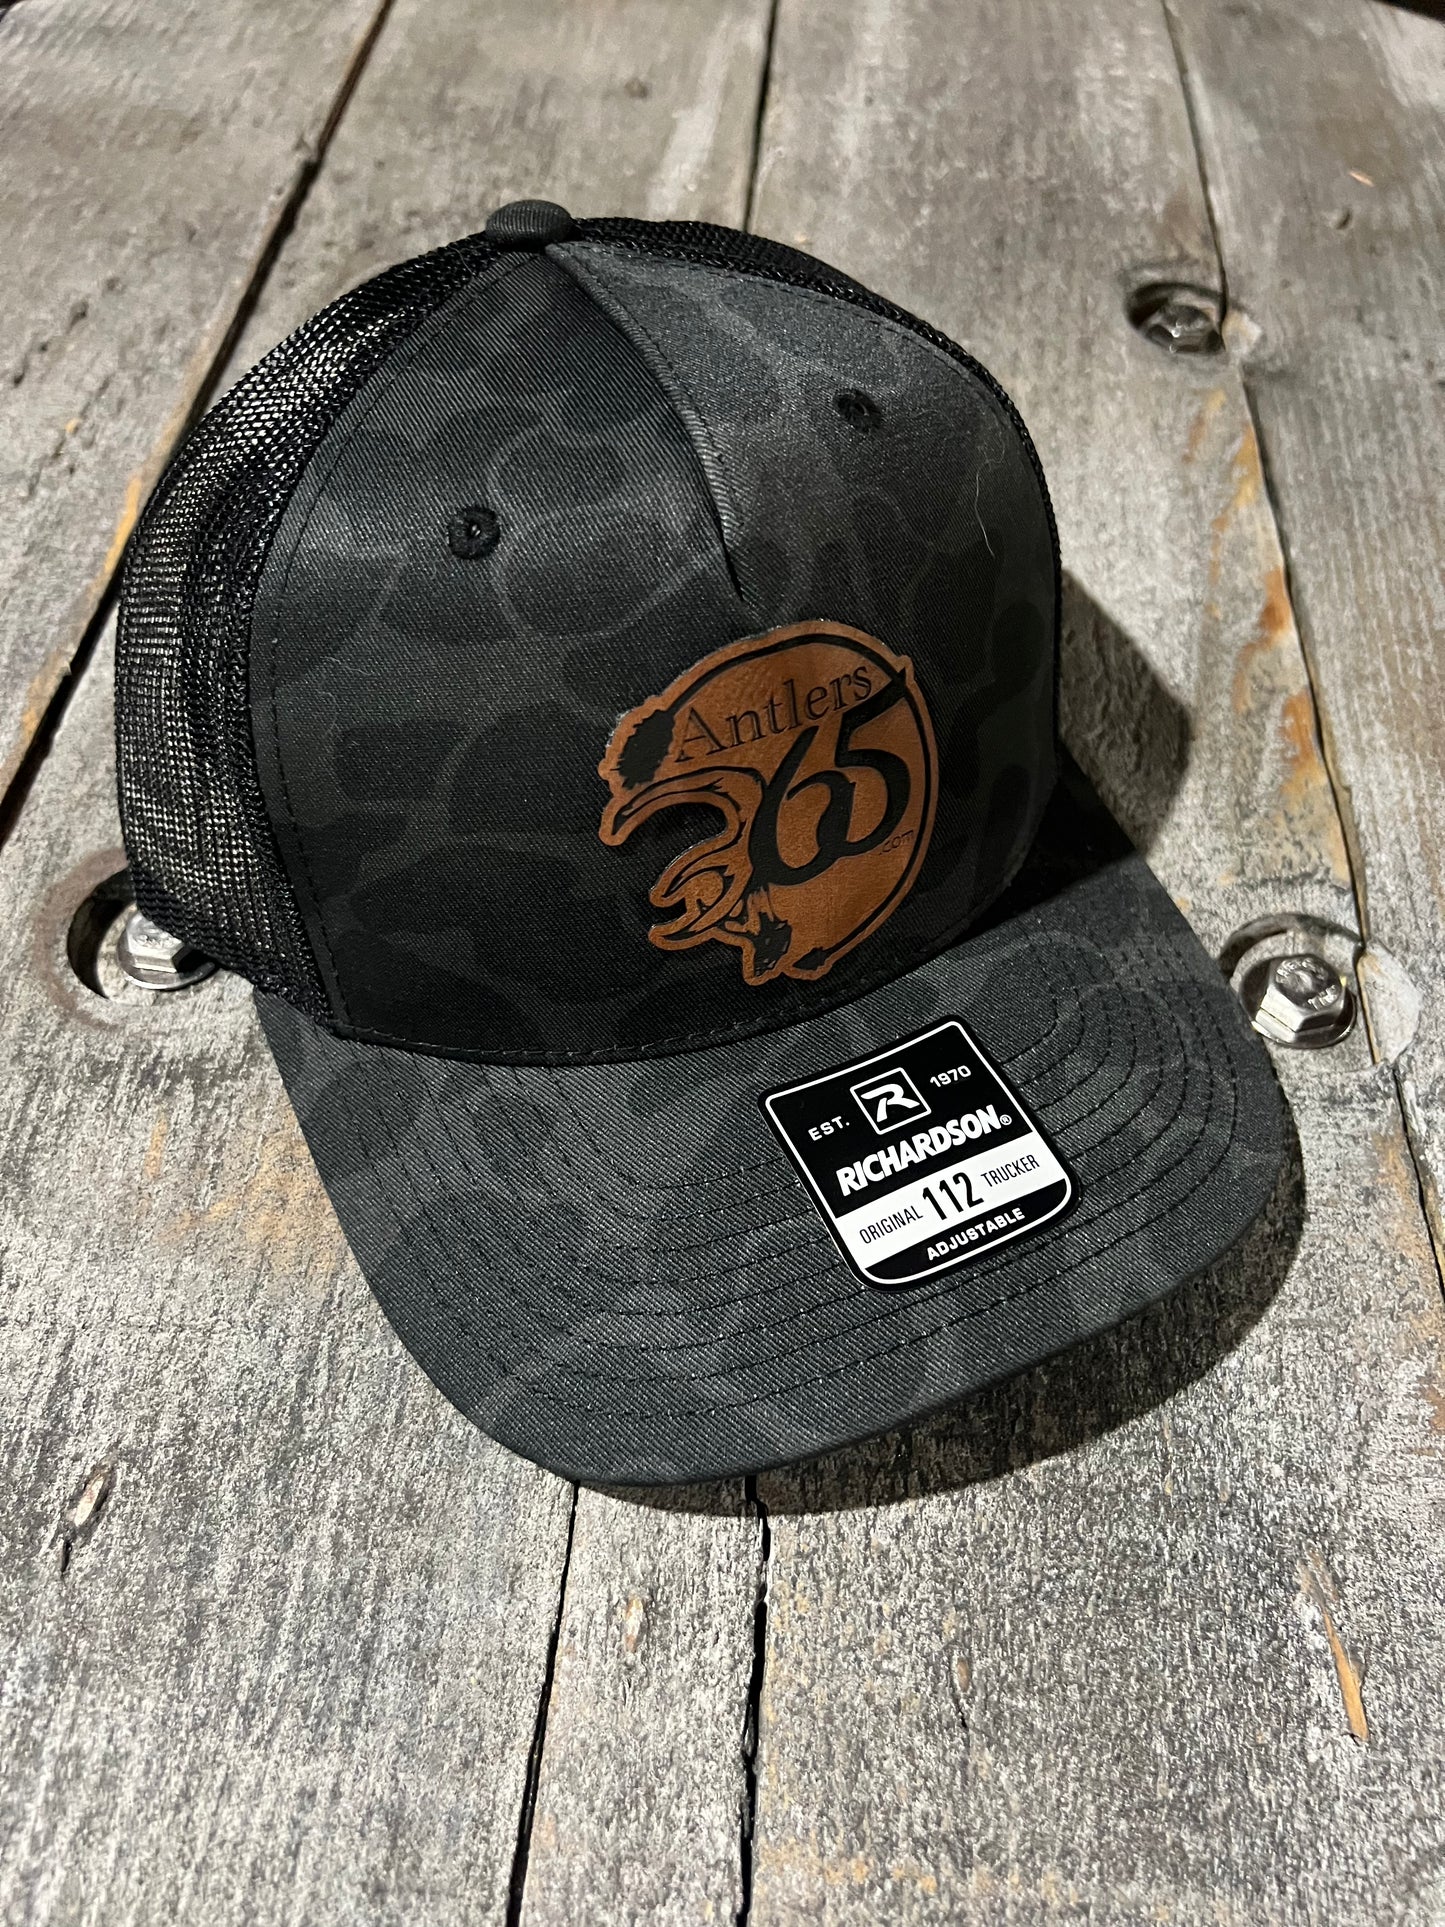 “Blackout” Edition Old School Duck Camo Hat